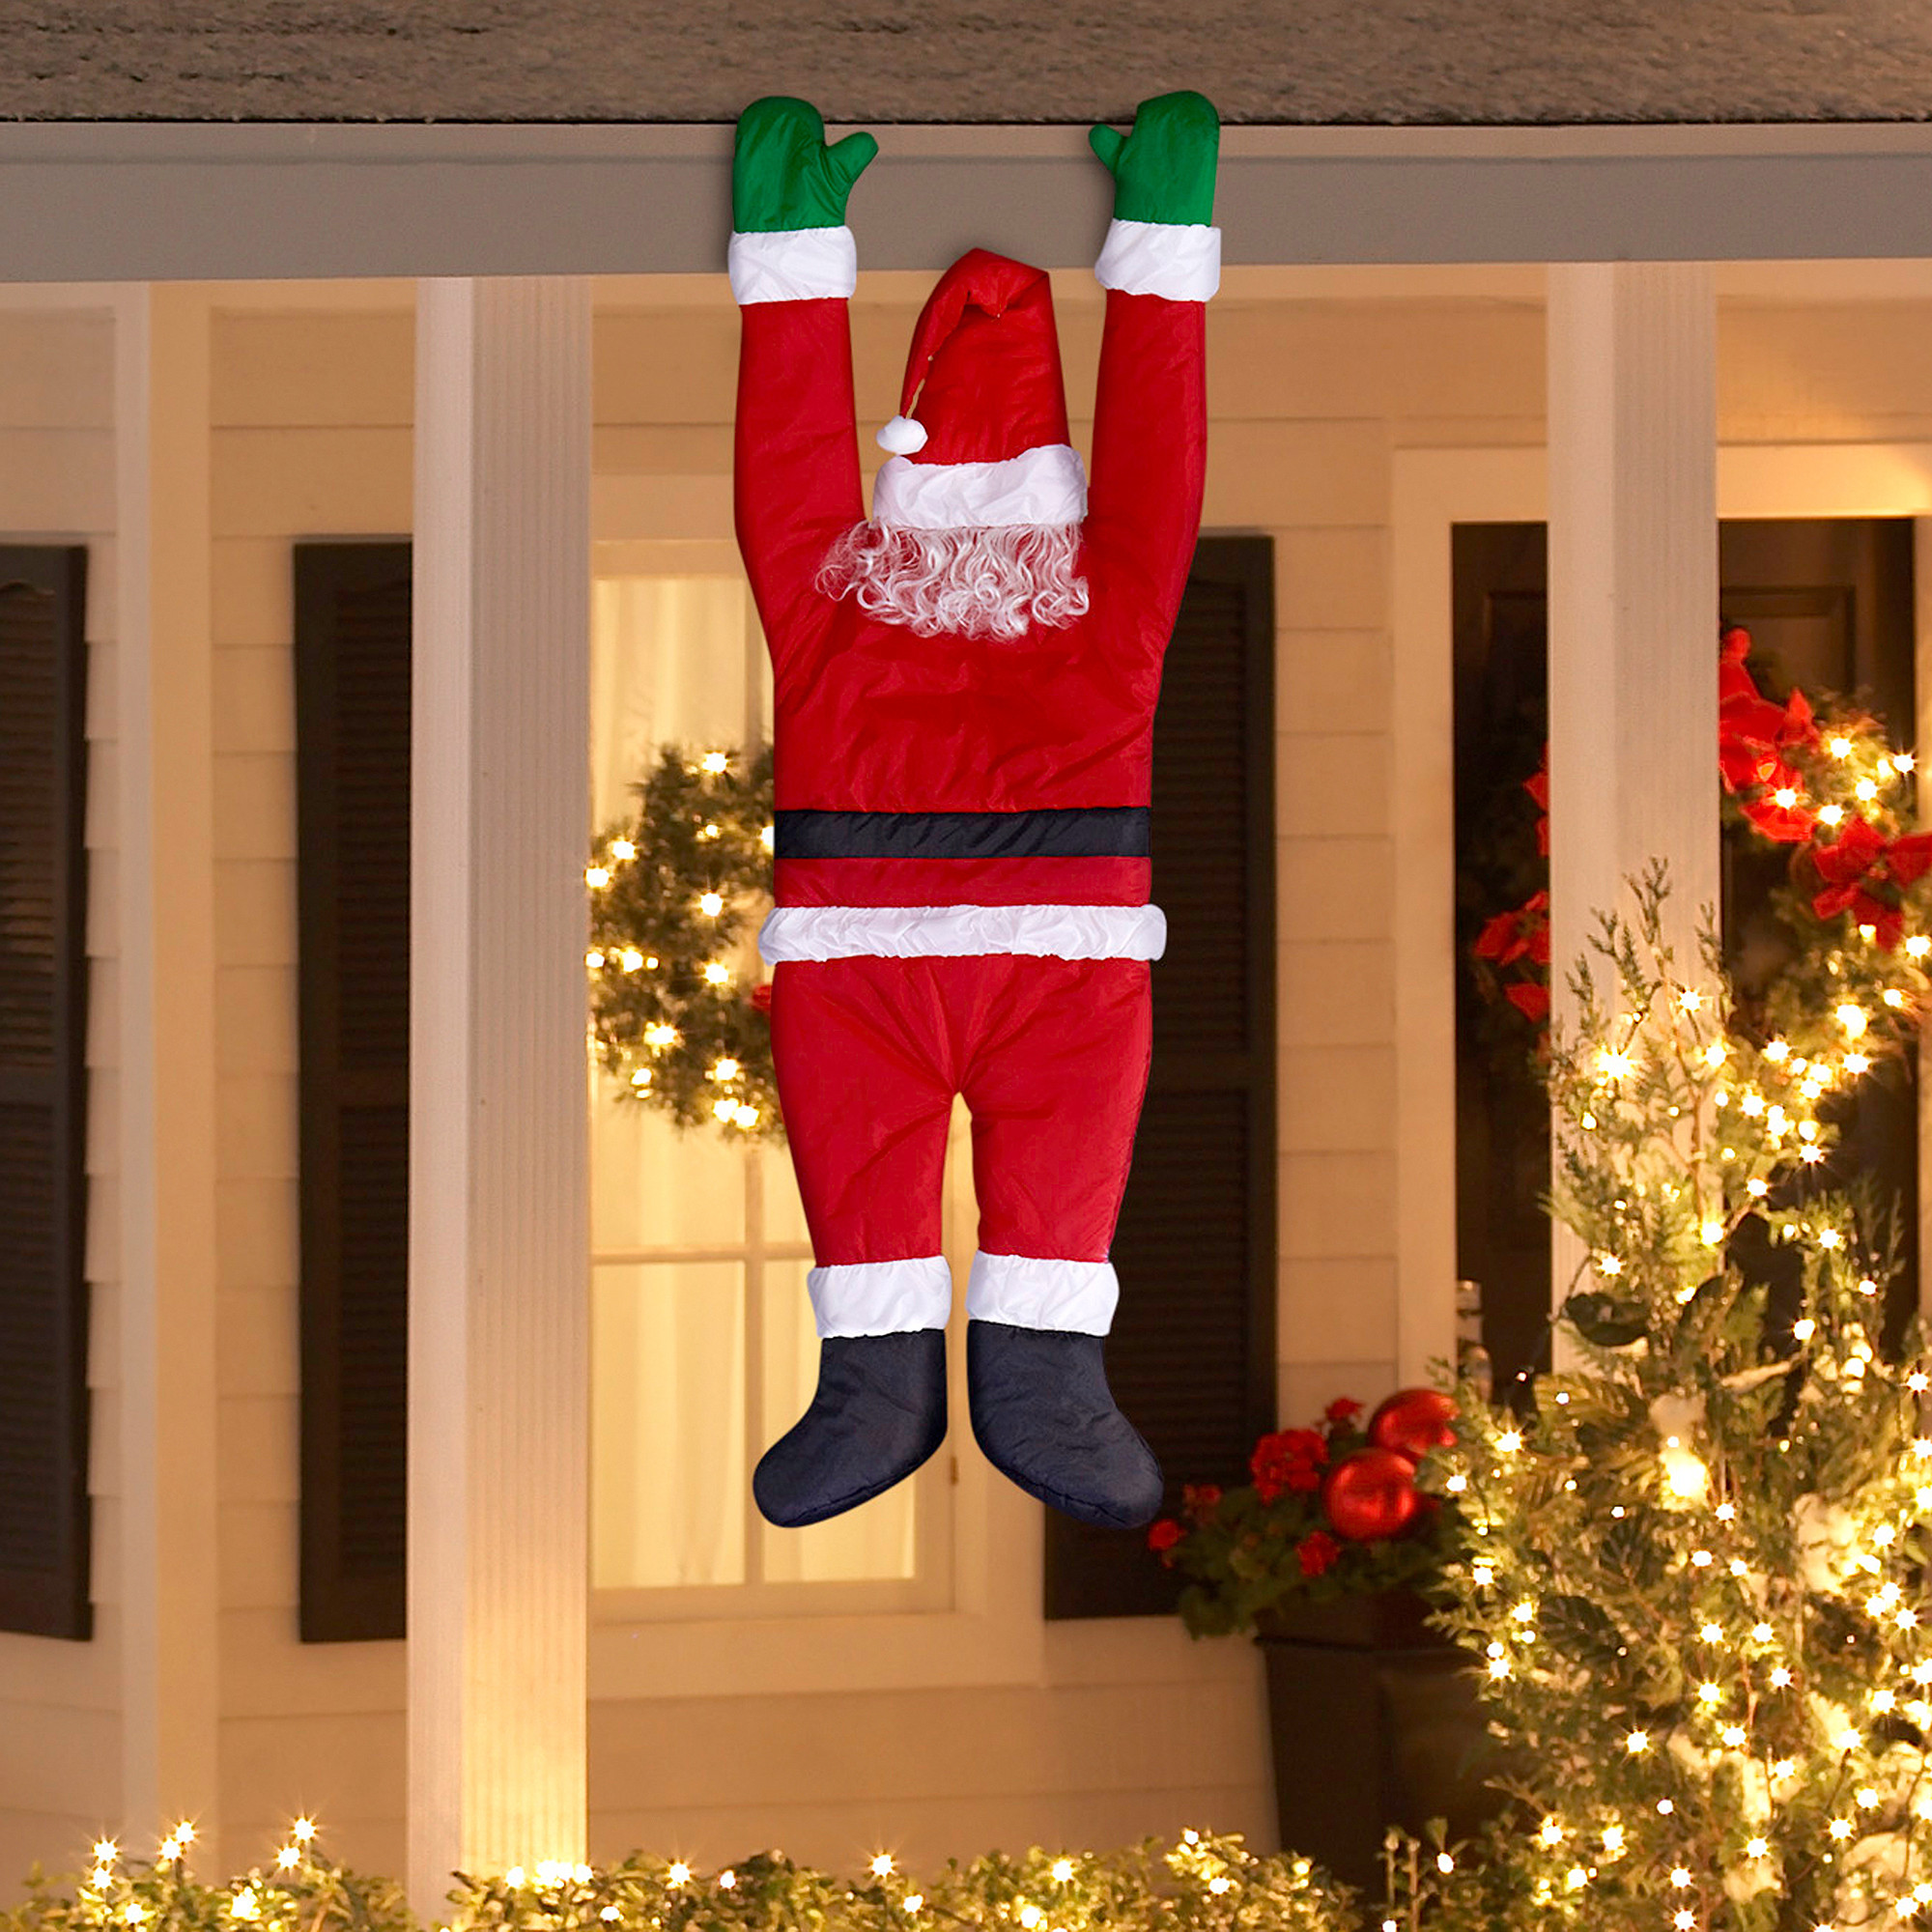 Walmart Christmas Decorations Indoor
 Holiday Time Christmas Decor Hanging Santa by Gemmy